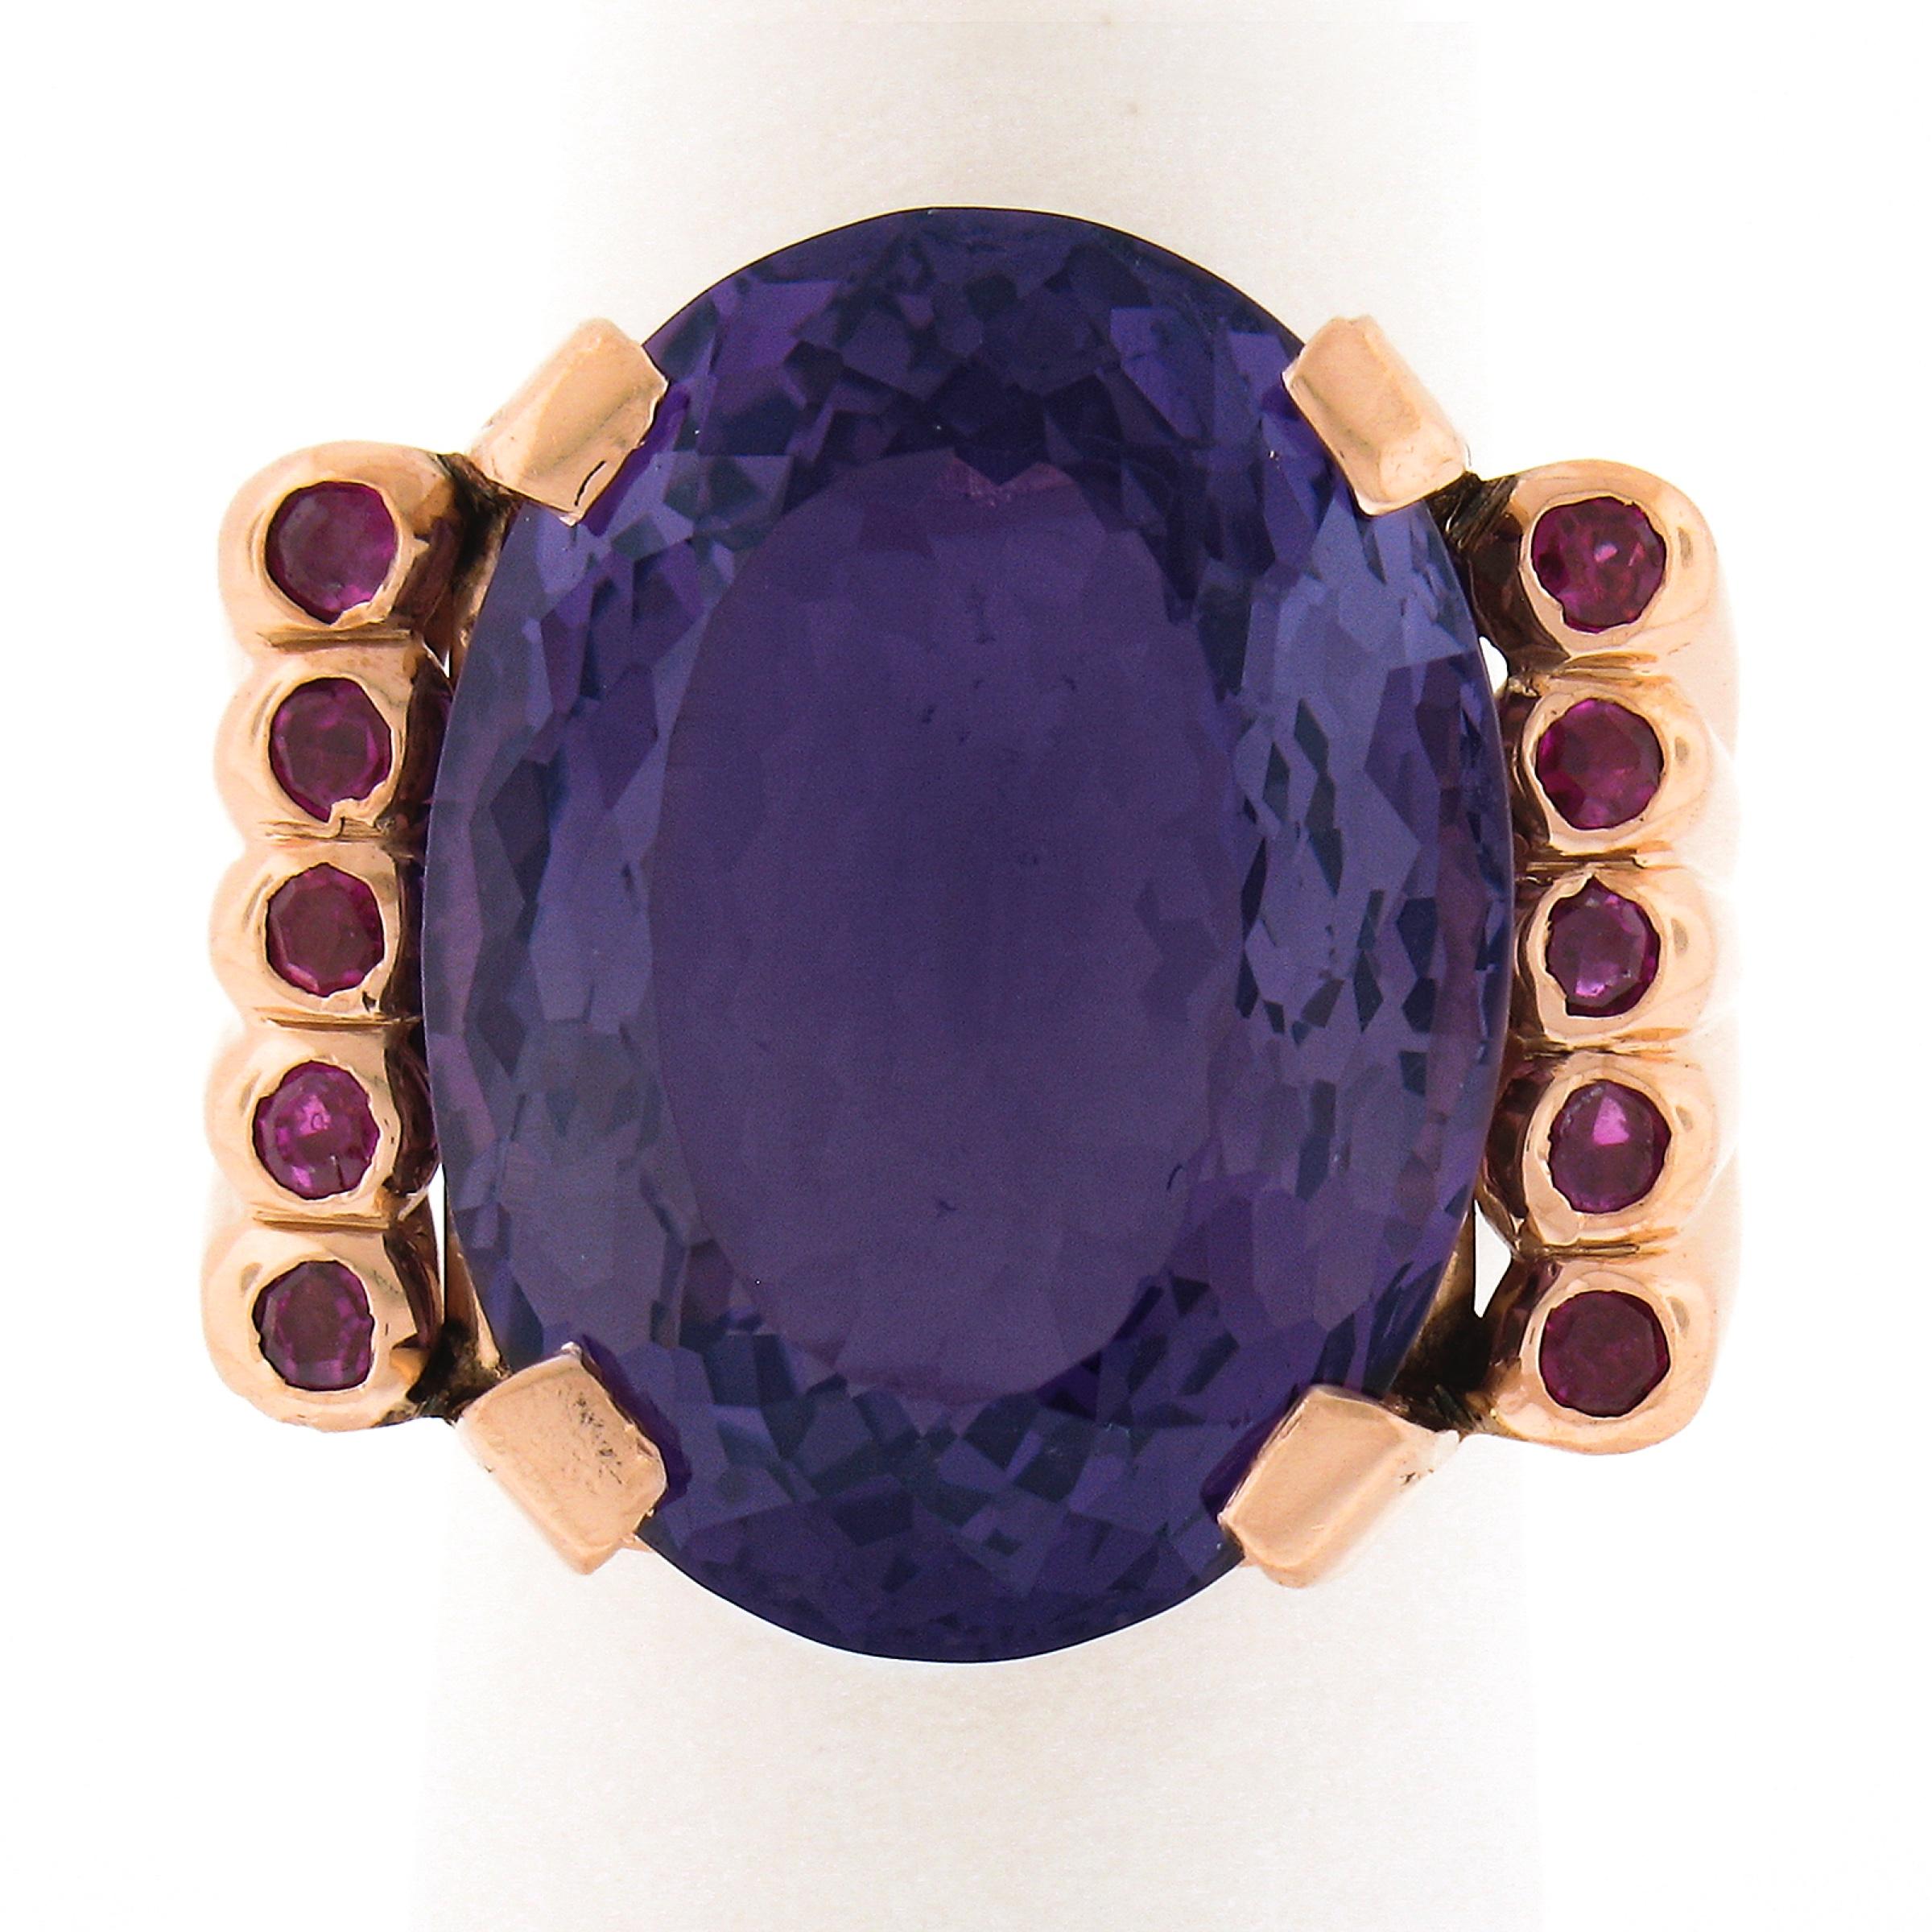 This magnificent vintage cocktail ring is crafted in solid 14k rose gold and features a gorgeous natural amethyst stone neatly prong set at its center. This large oval amethyst displays the most gorgeous and mesmerizing medium to dark purple color